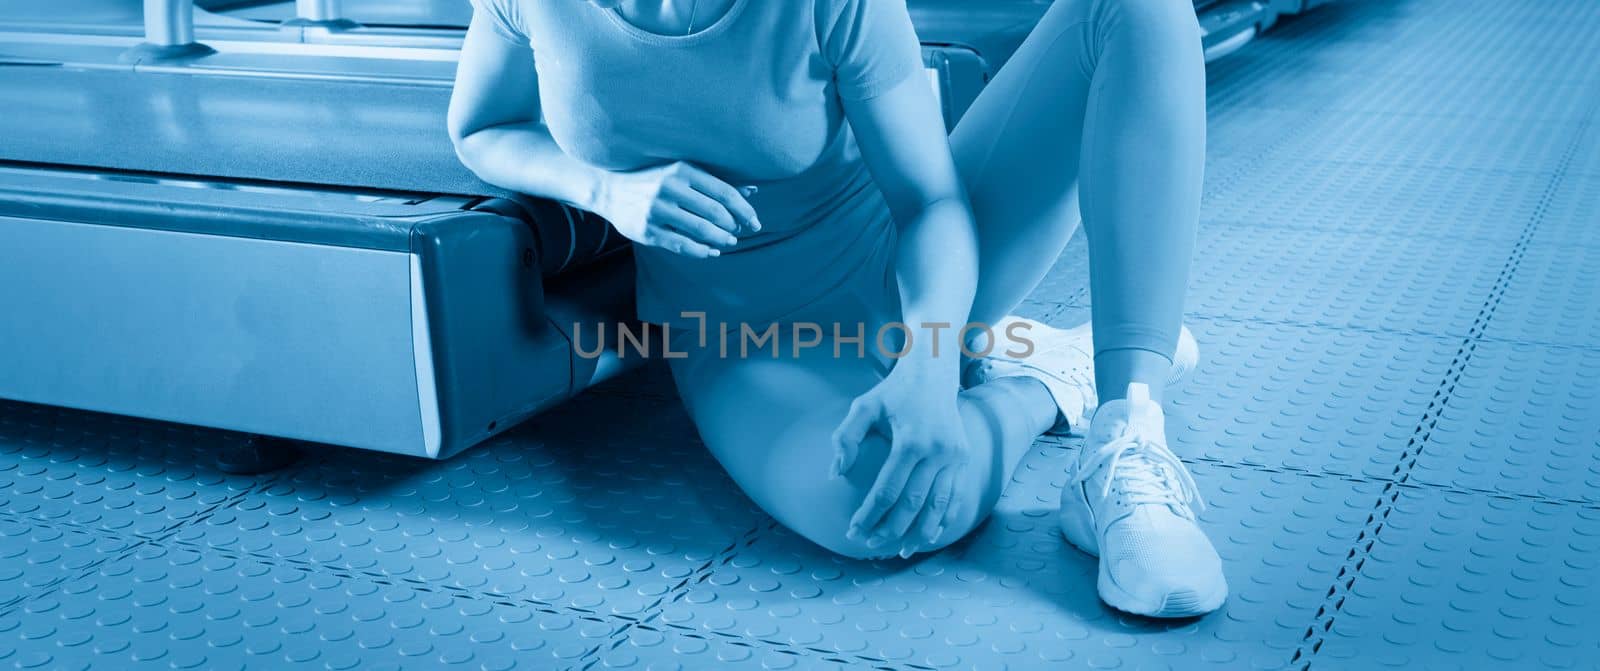 Young woman in sportswear having pain in her knee while training in gym, Girl sitting on a floor touching her knee in pain by Mariakray